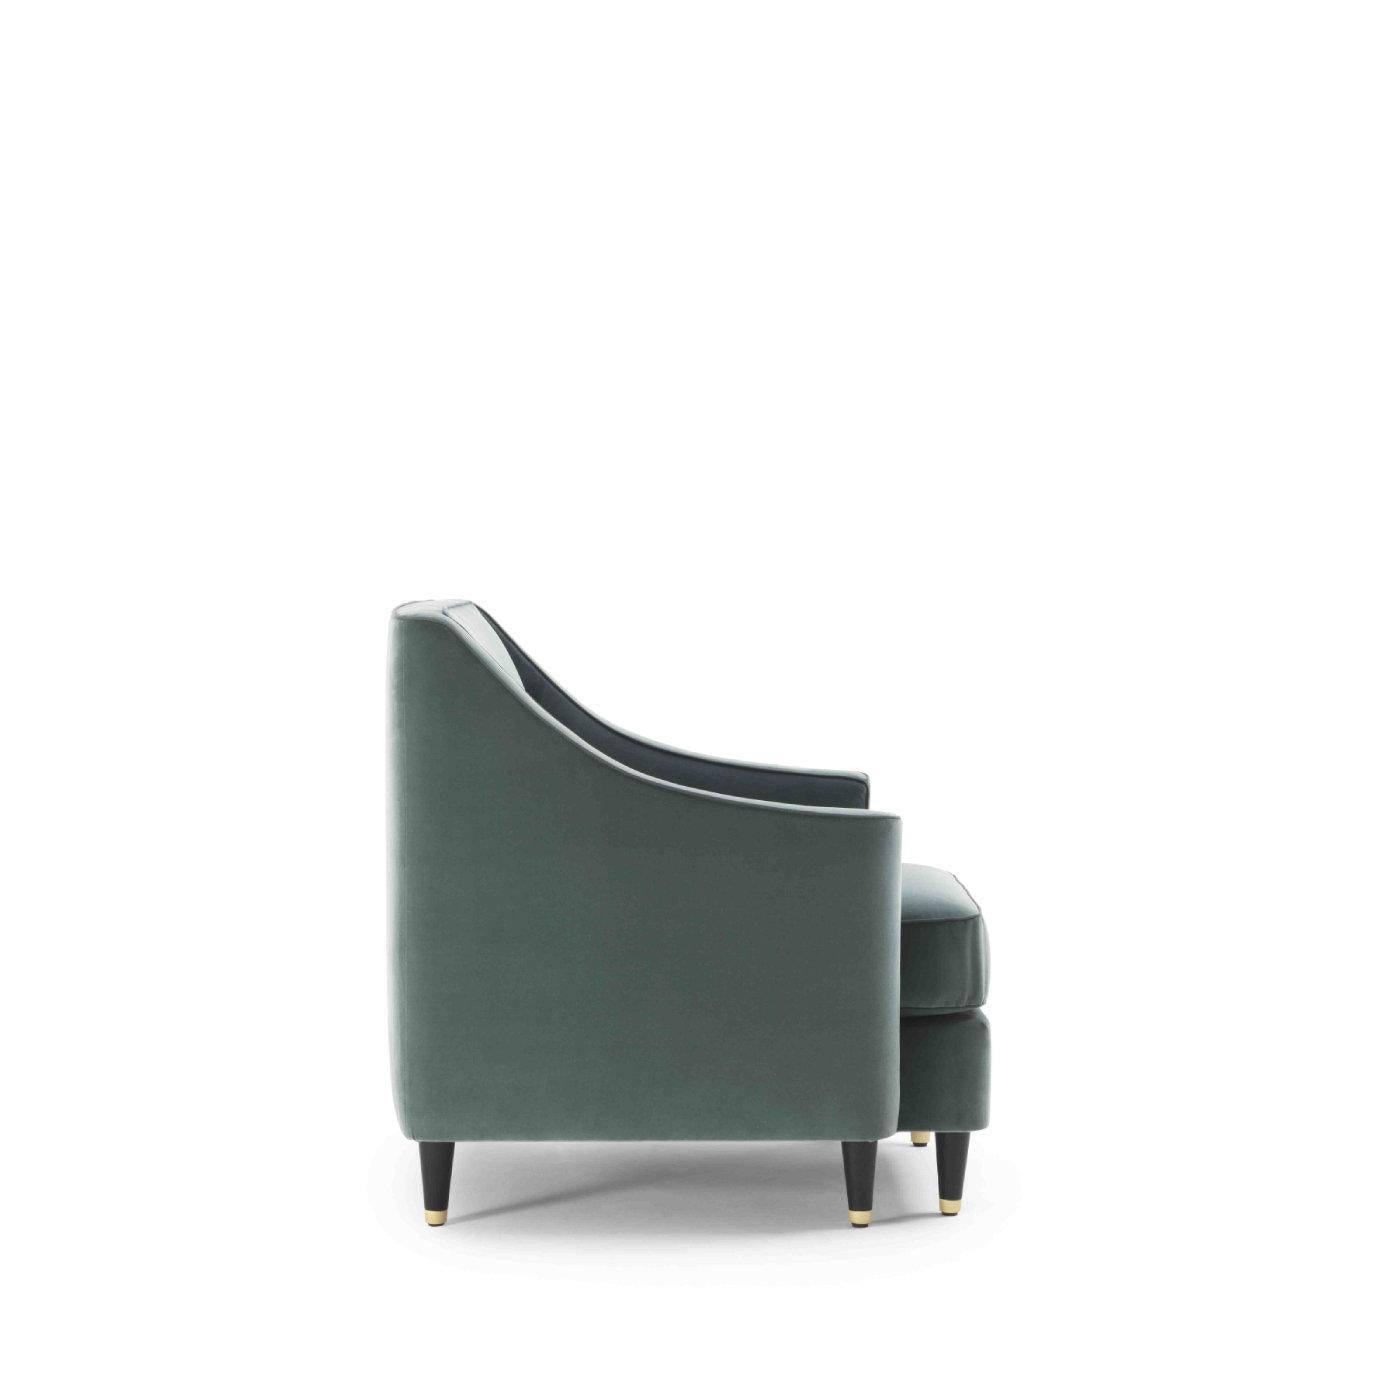 The welcoming design of this club armchair will enliven a traditional or transitional living room, creating an elegant look with the sofa from the same collection. Defined by a generous seat, squared back, and flared armrests, the plywood/solid wood